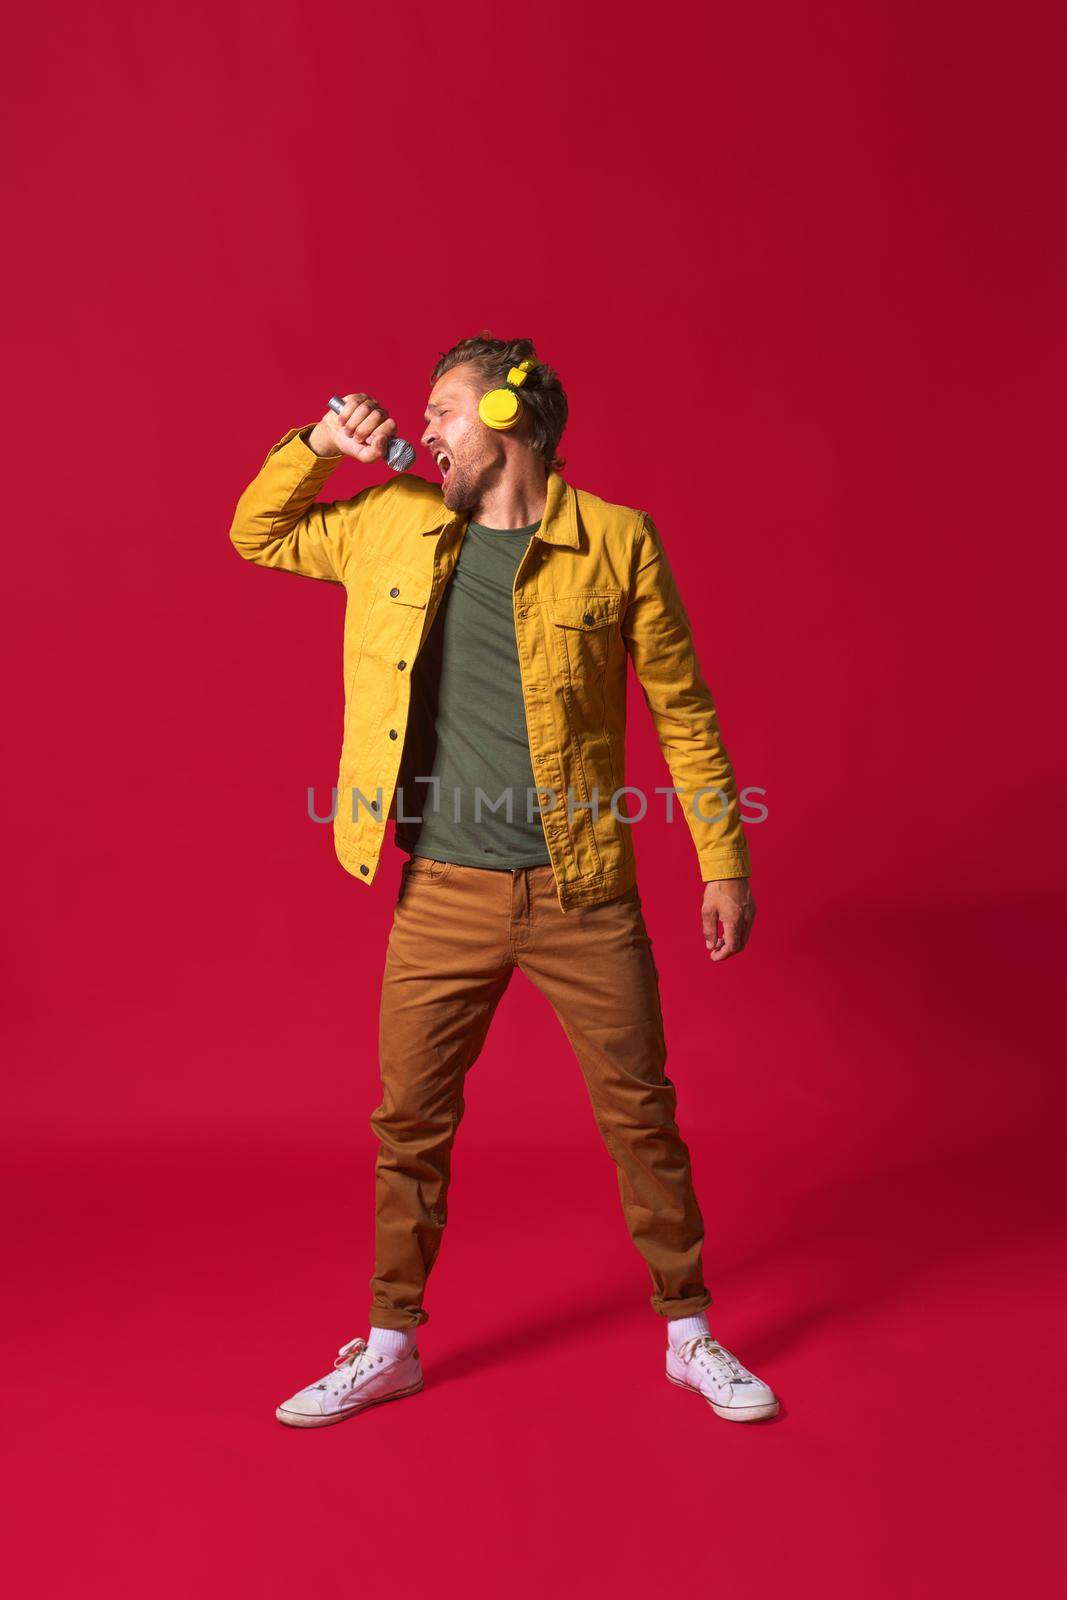 Singing young man enjoying his favorite song holding microphone and wireless headphones wearing casual jacket isolated on red background. Man sing while recording his voice. A star is born.